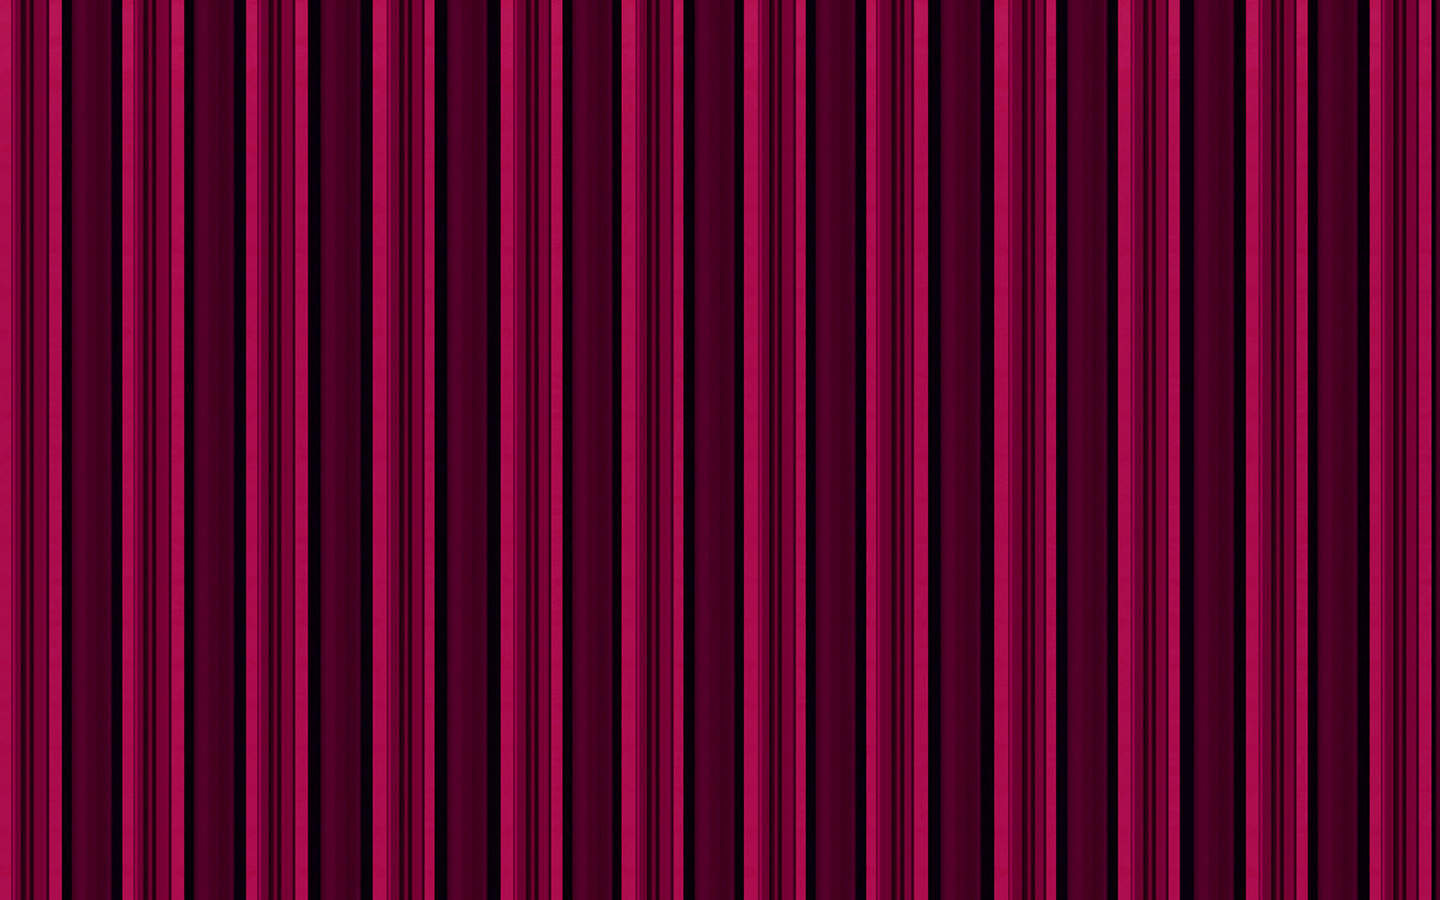 Maroon Photo and Picture, RT65 FHDQ Wallpaper